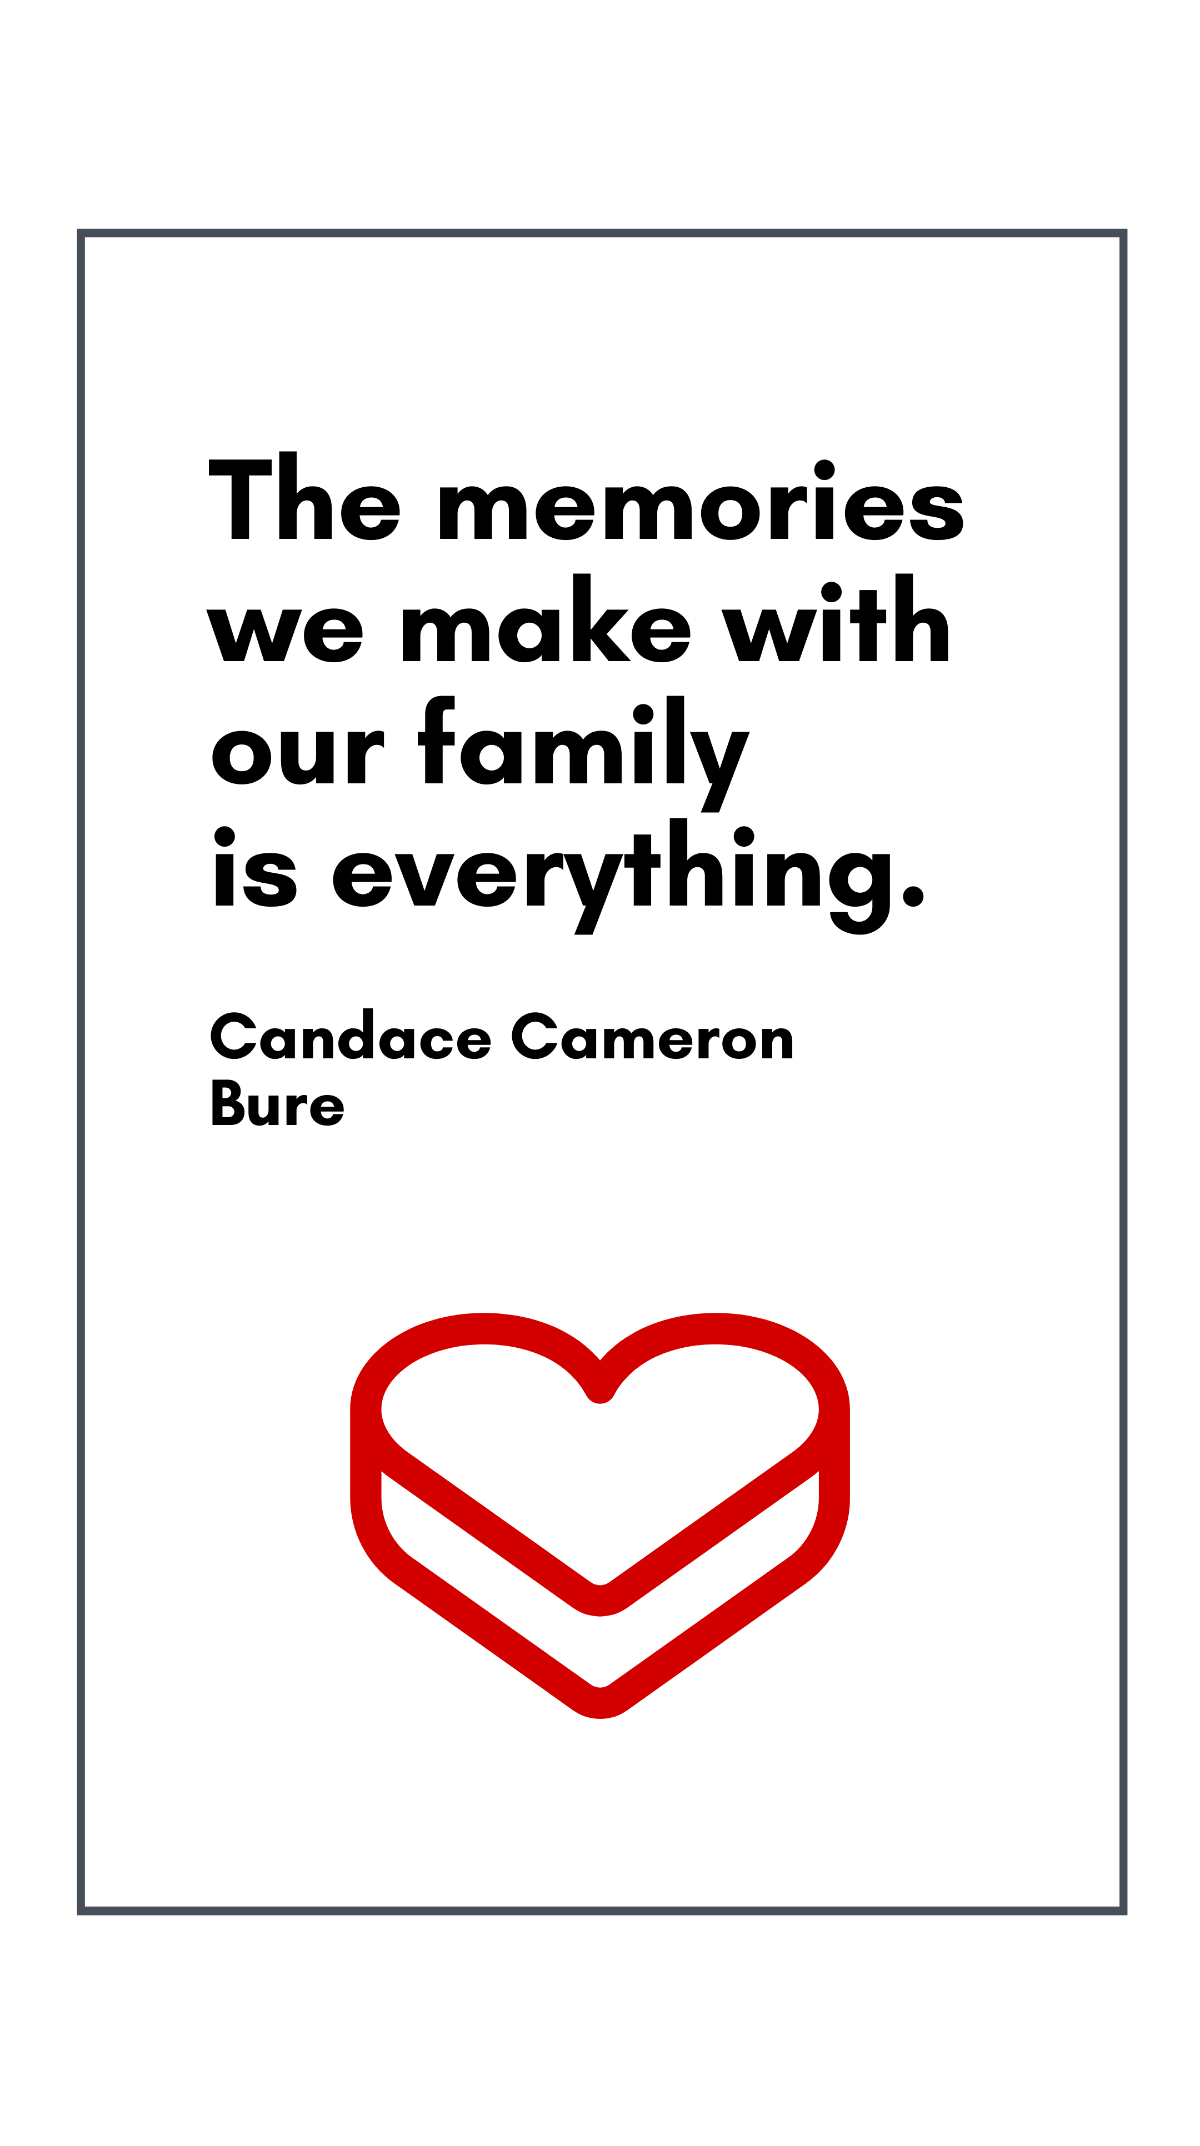 Free Candace Cameron Bure - The memories we make with our family is everything. Template